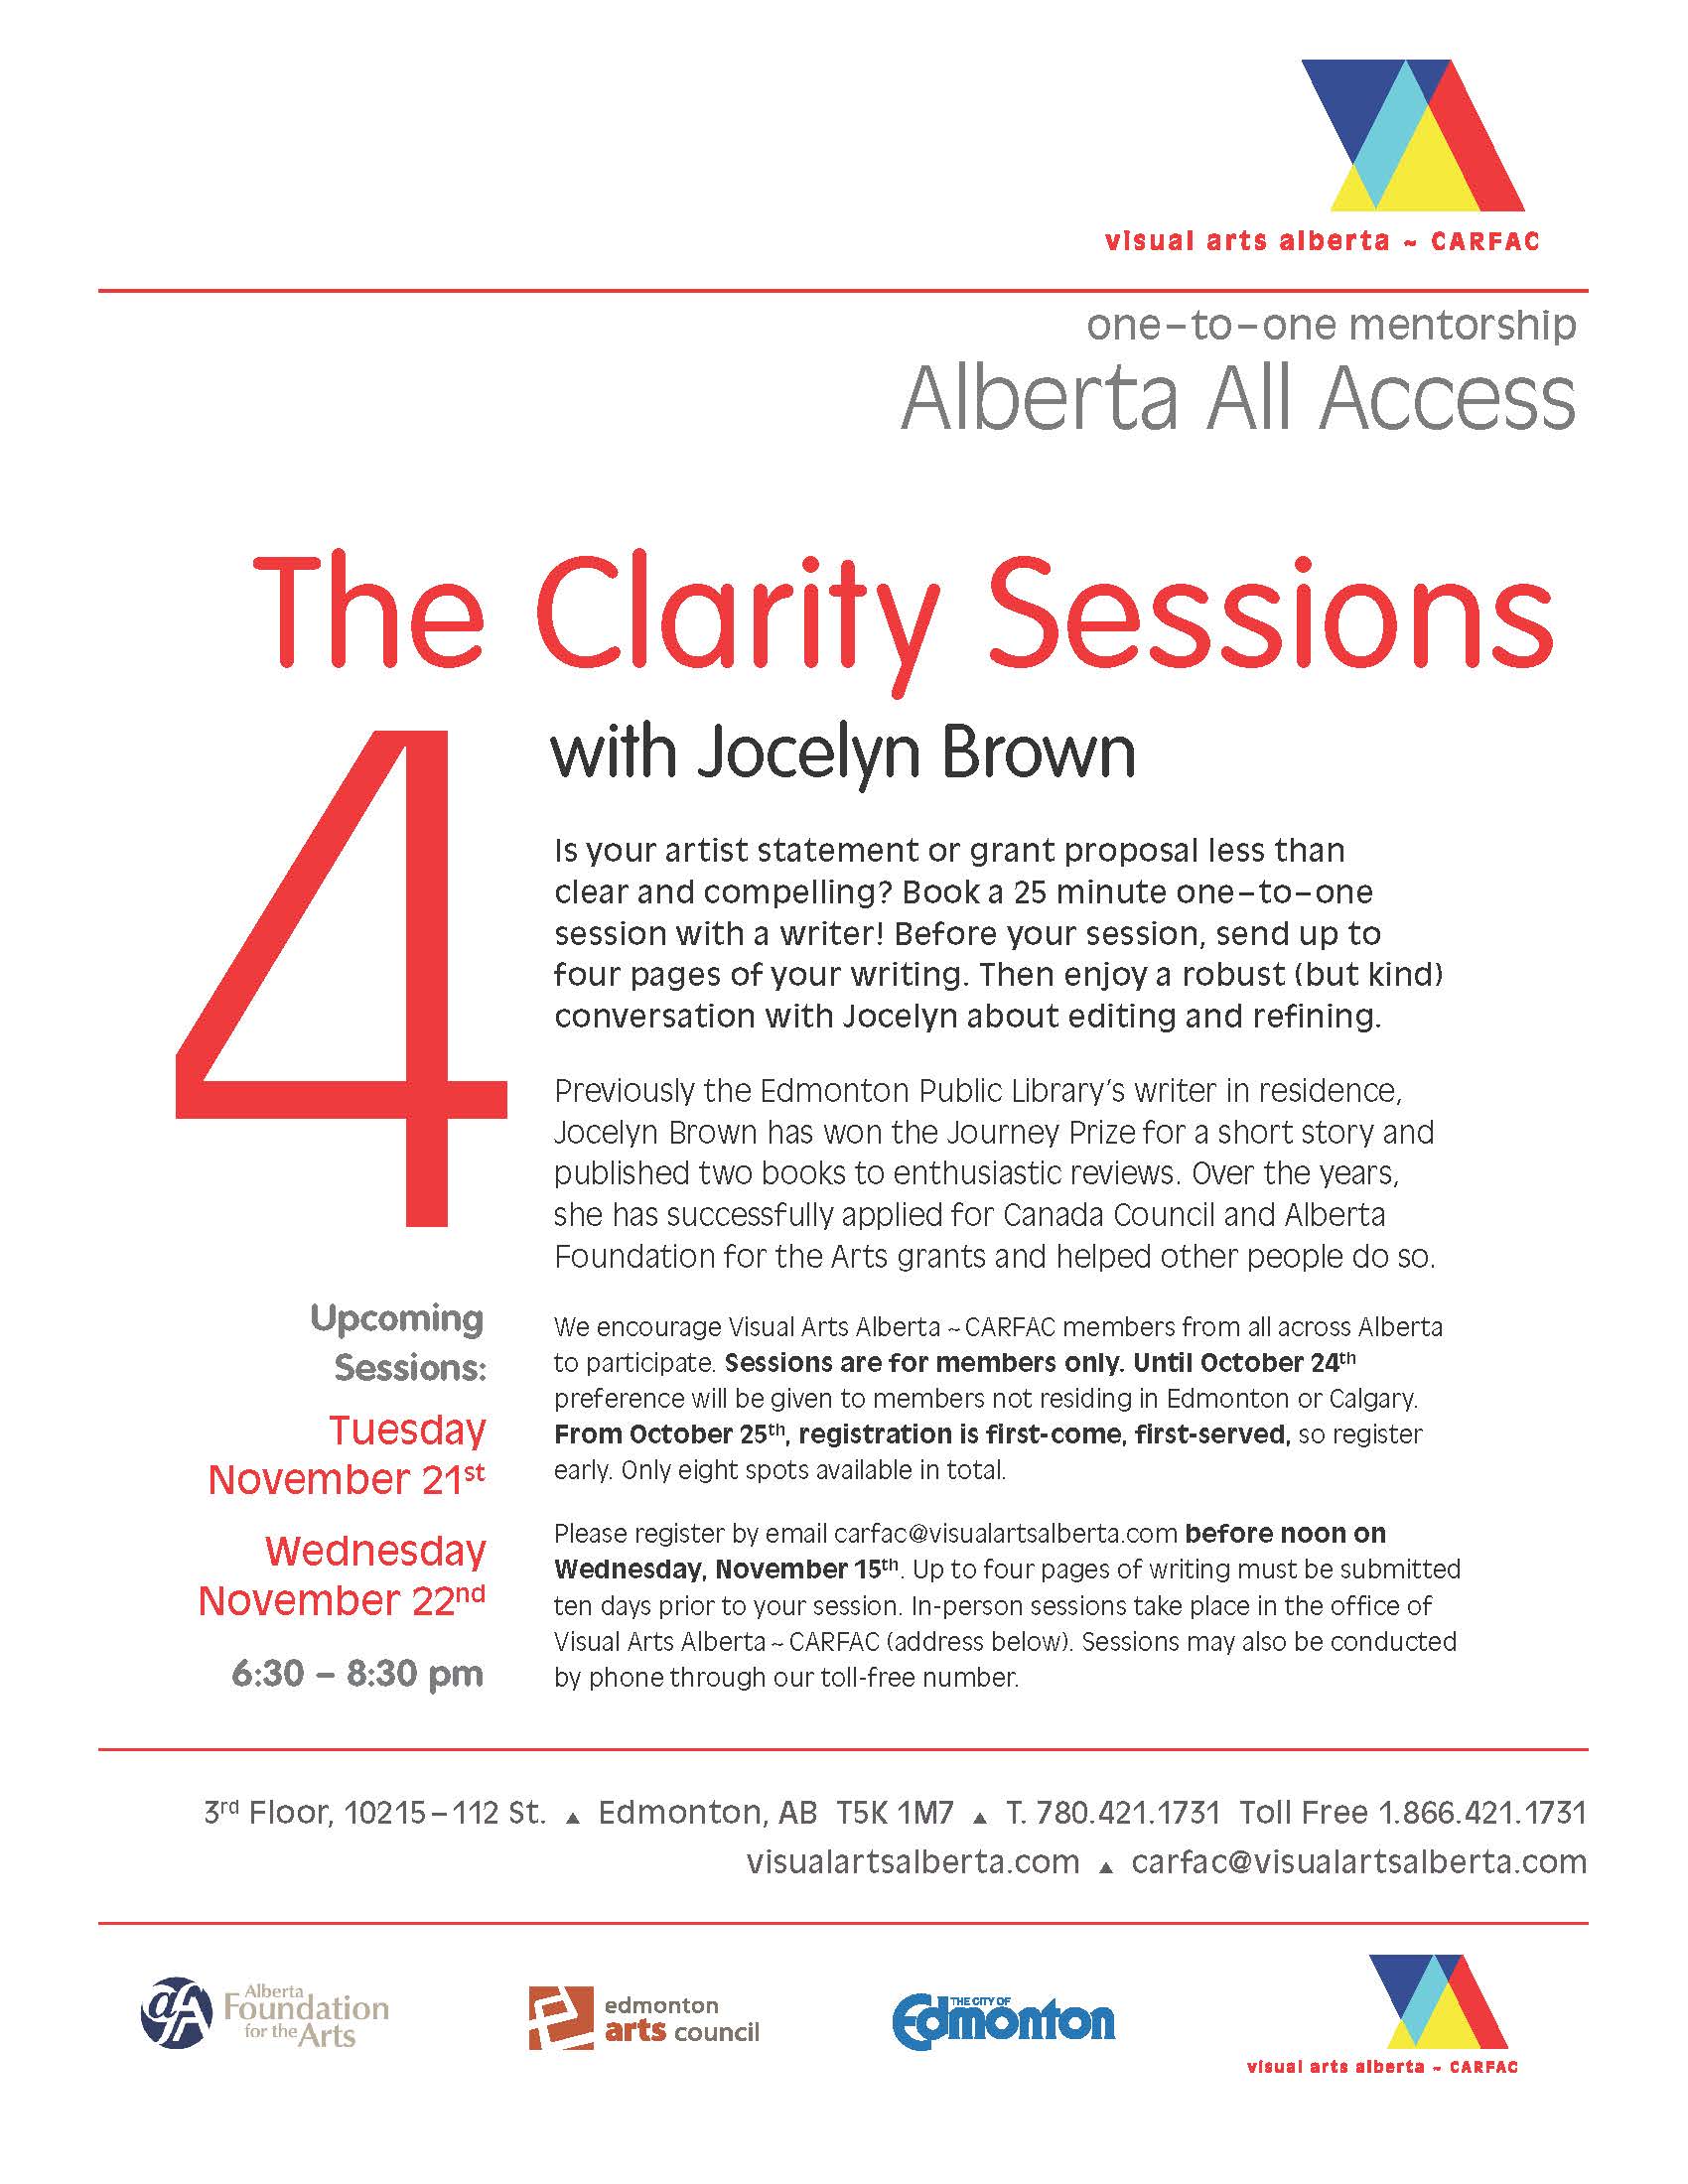 Image information - The Clarity Sessions 4 with Jocelyn Brown